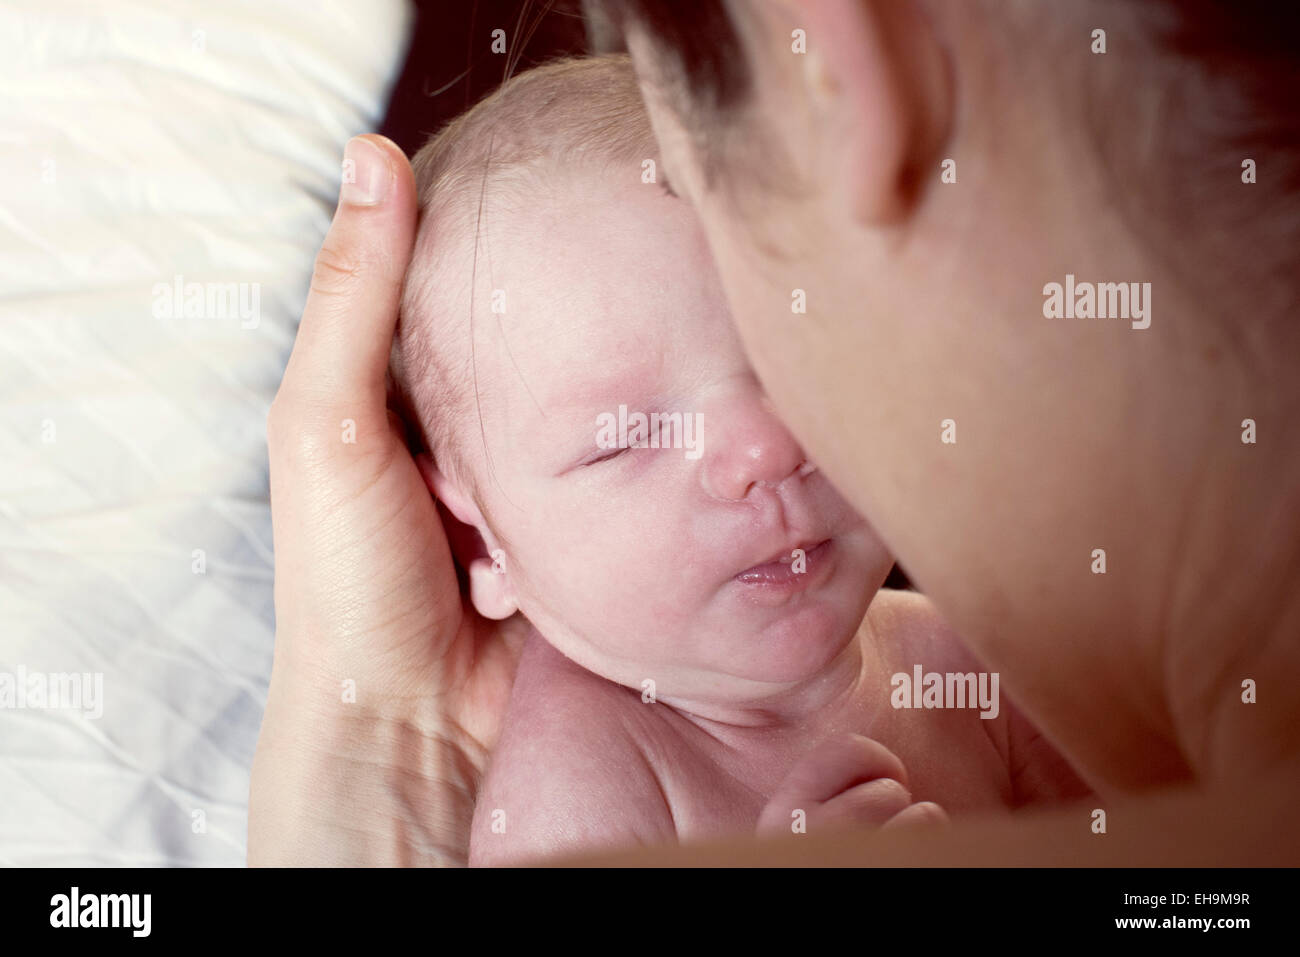 Mother bonding with newborn baby, over the shoulder view Stock Photo